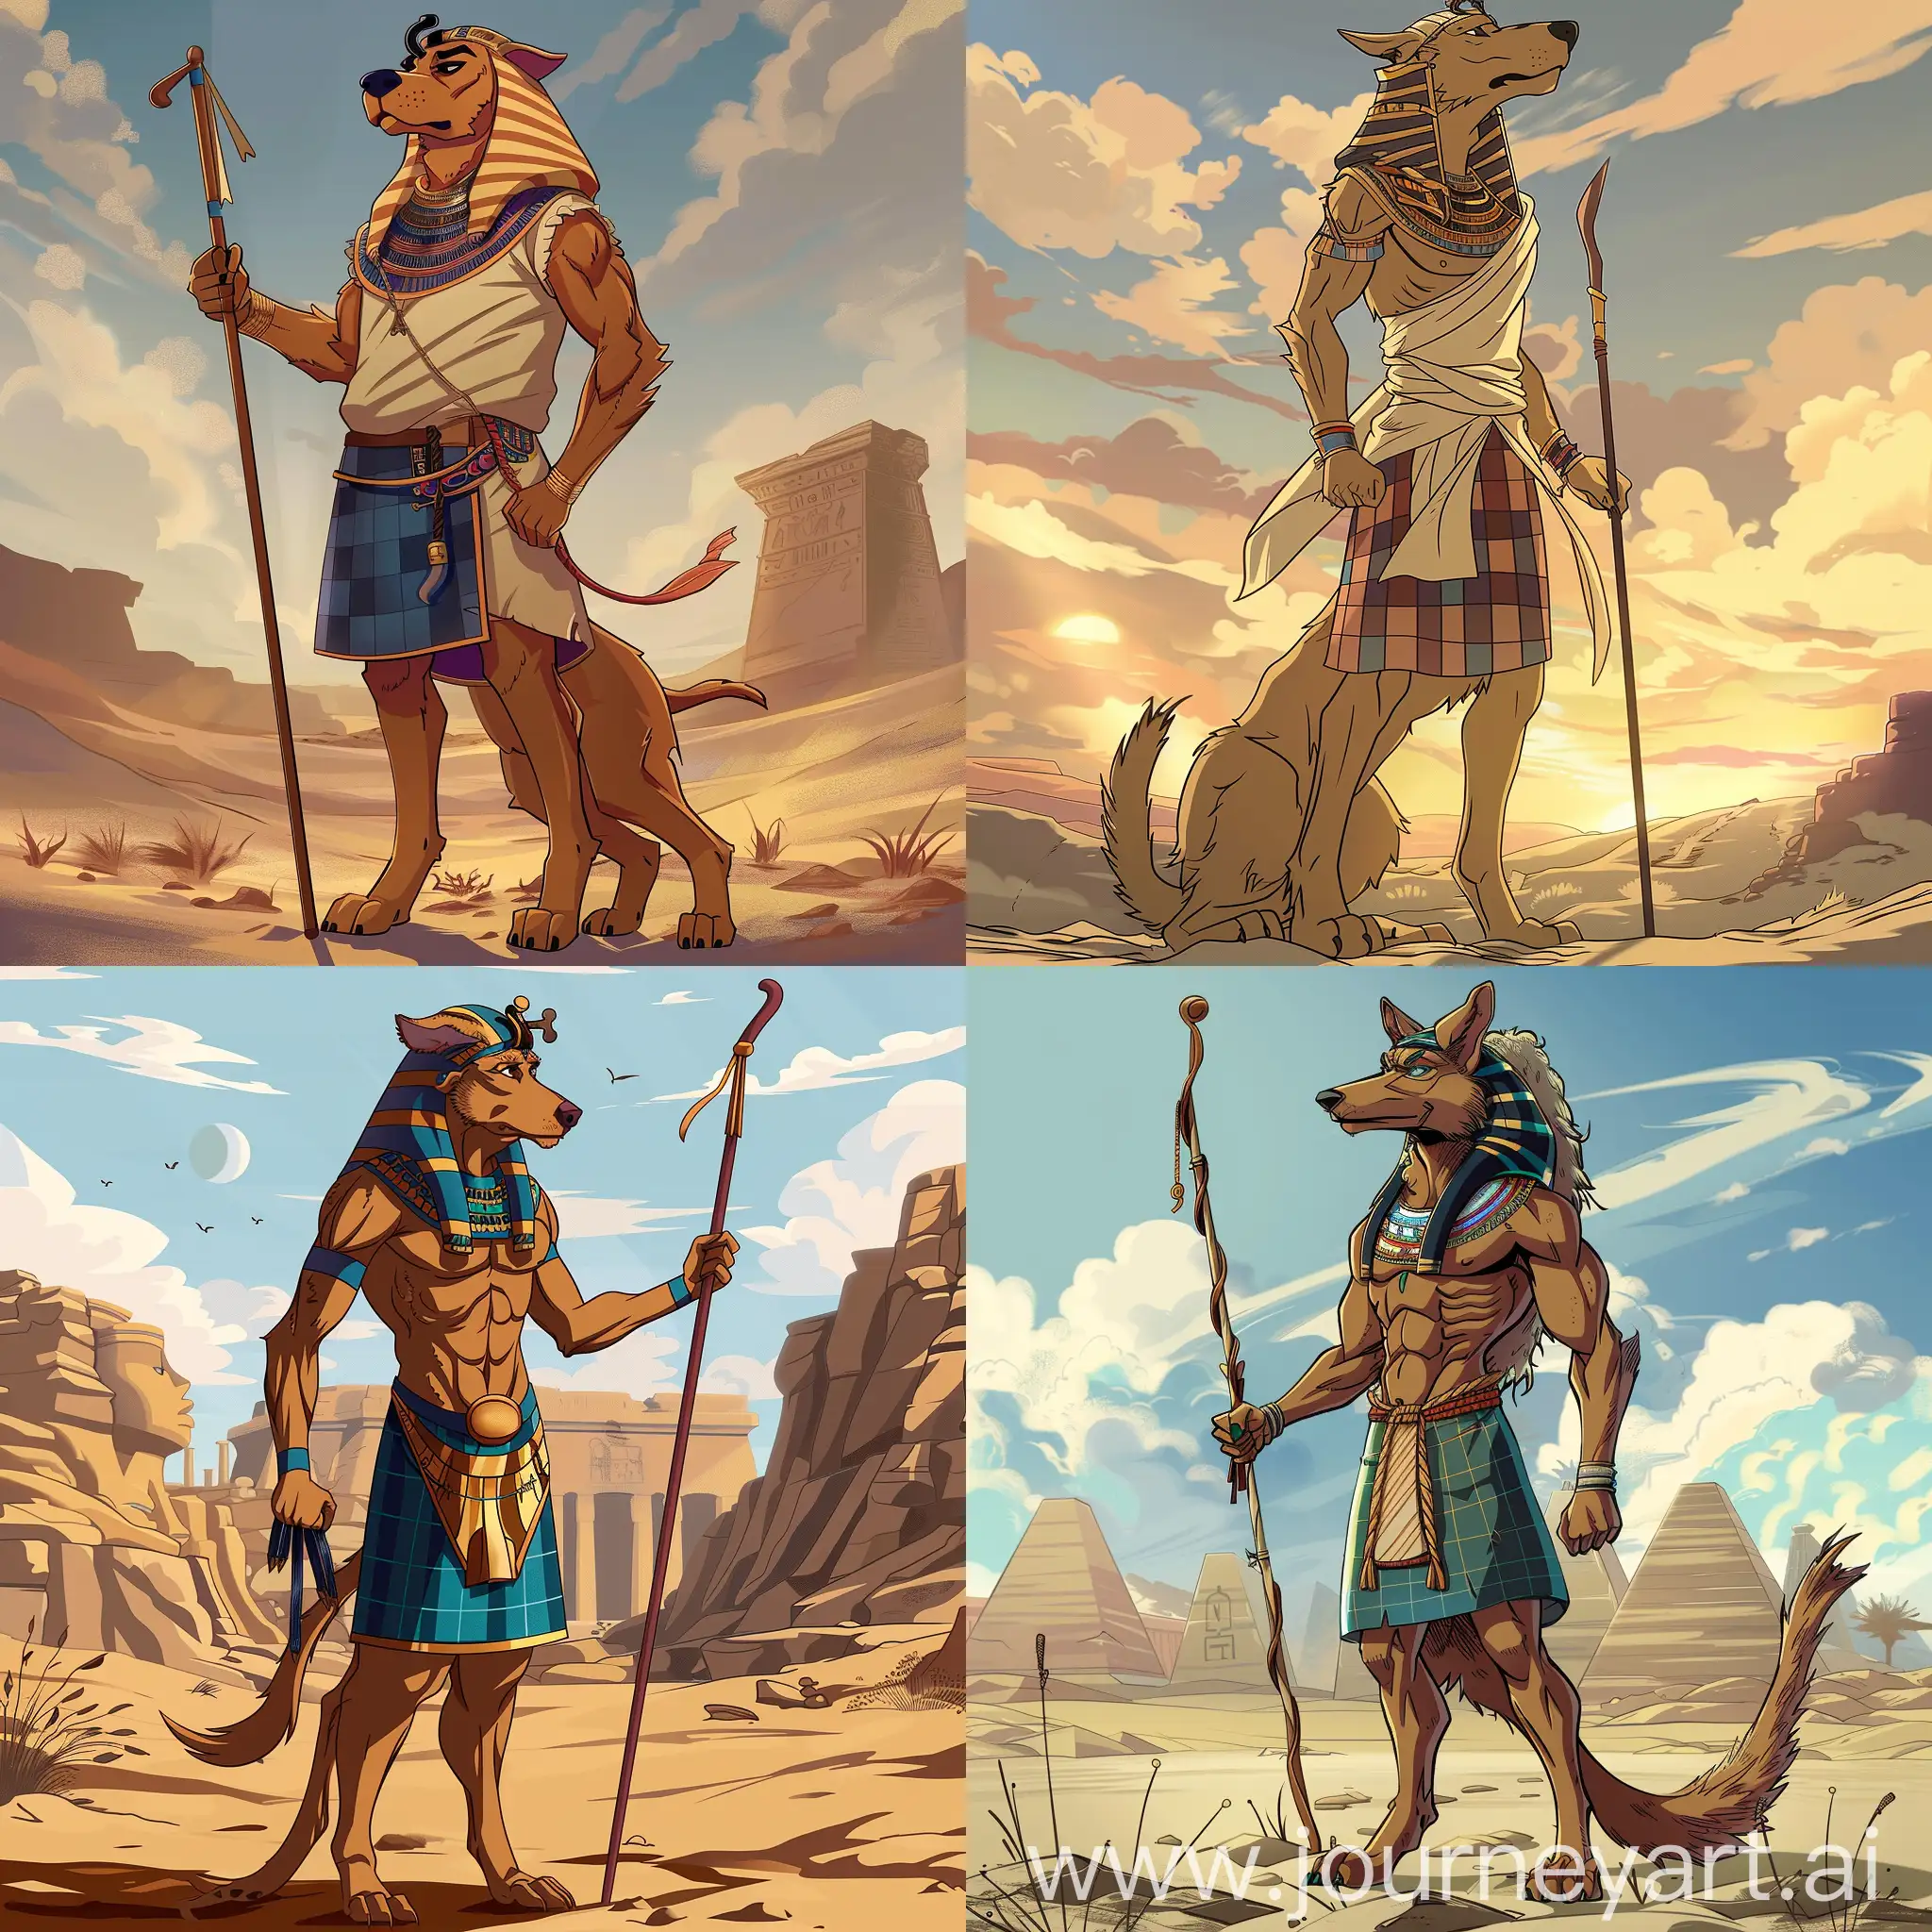 Anime illustration of a human which shaped at a shepherd dog, depicted in pharaoh kilt and headdress, has a staff in his hand, epic, at desert, illustration by scooby doo